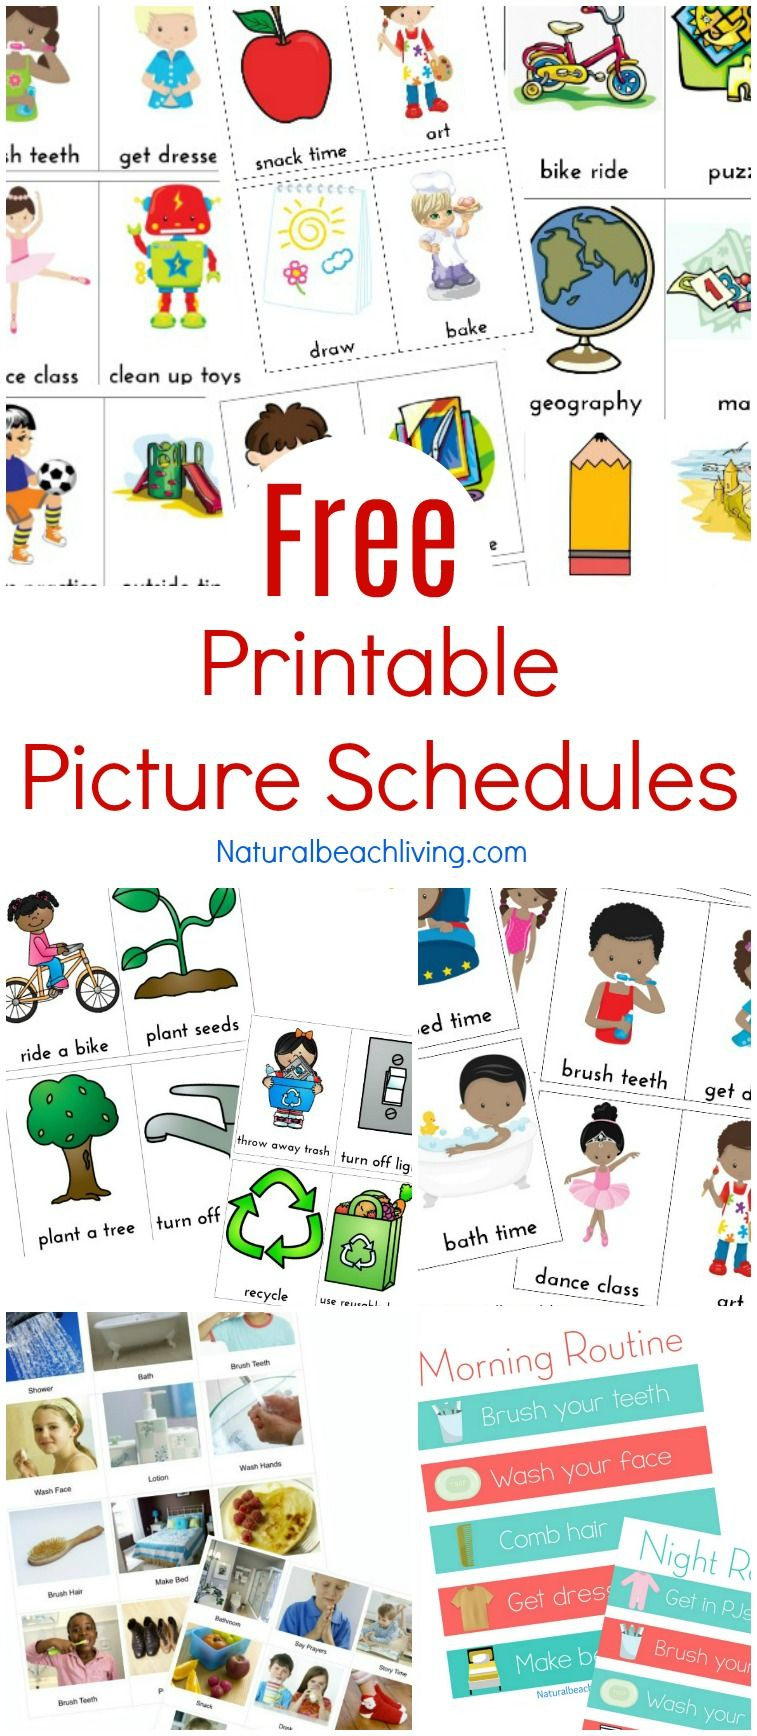 Free Printable Picture Schedule Cards - Visual Schedule Printables - Free Printable Visual Schedule For Preschool